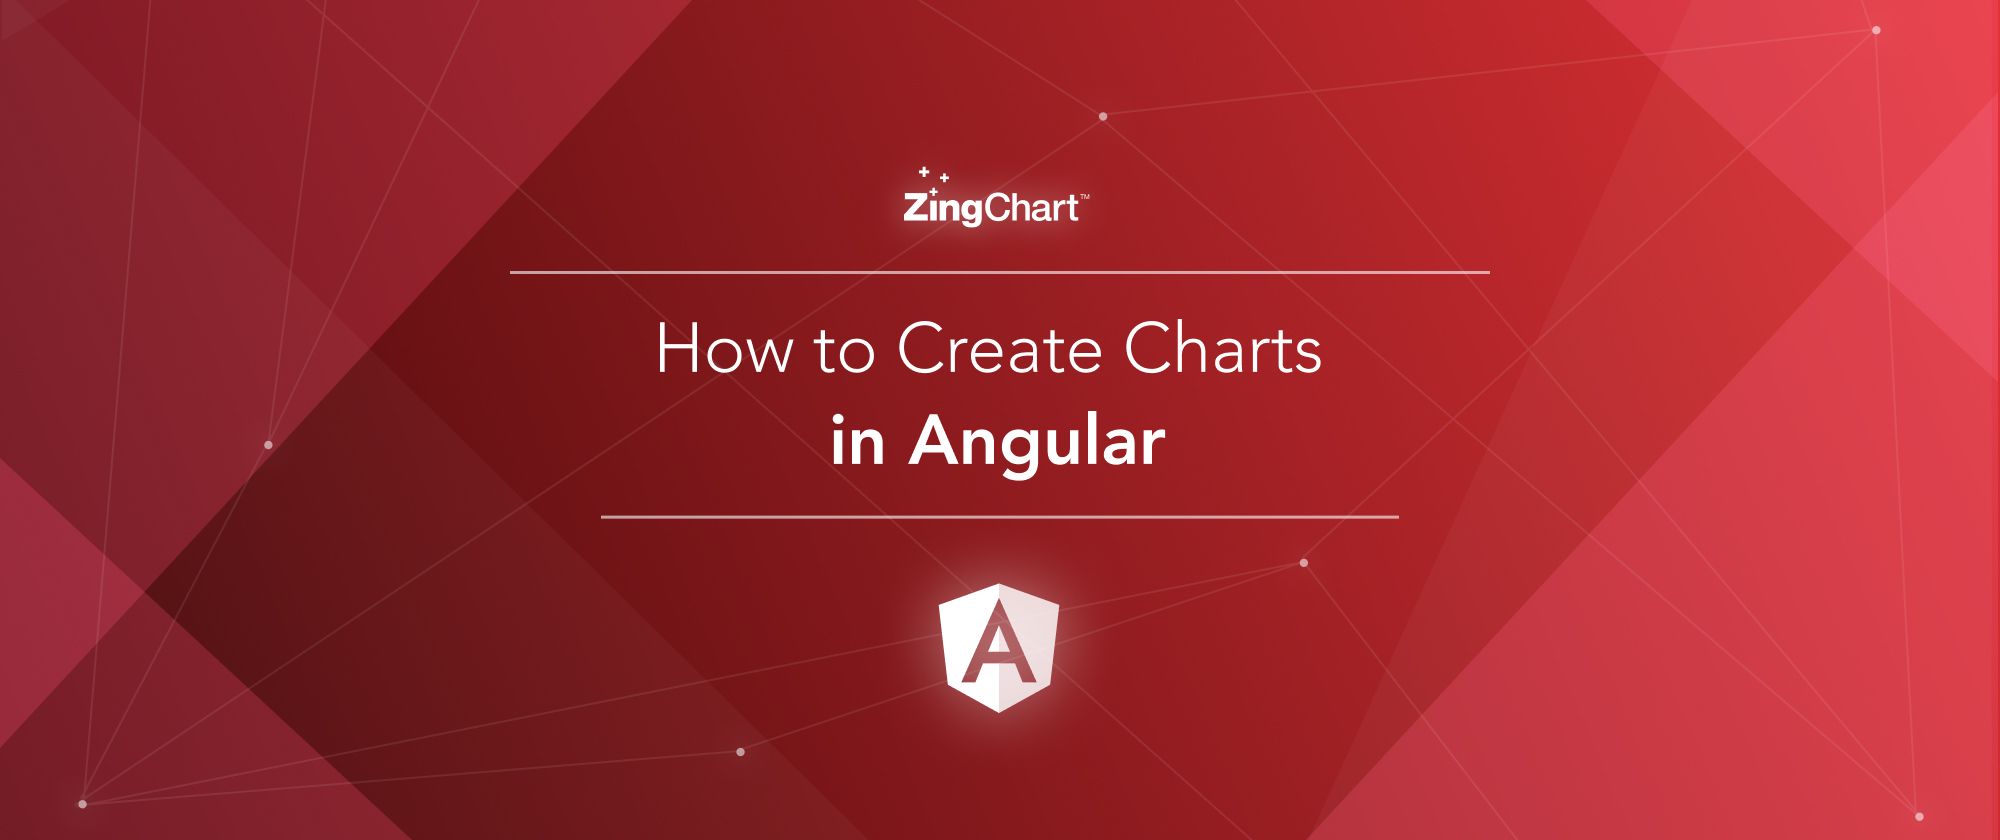 How to Create Charts in Angular